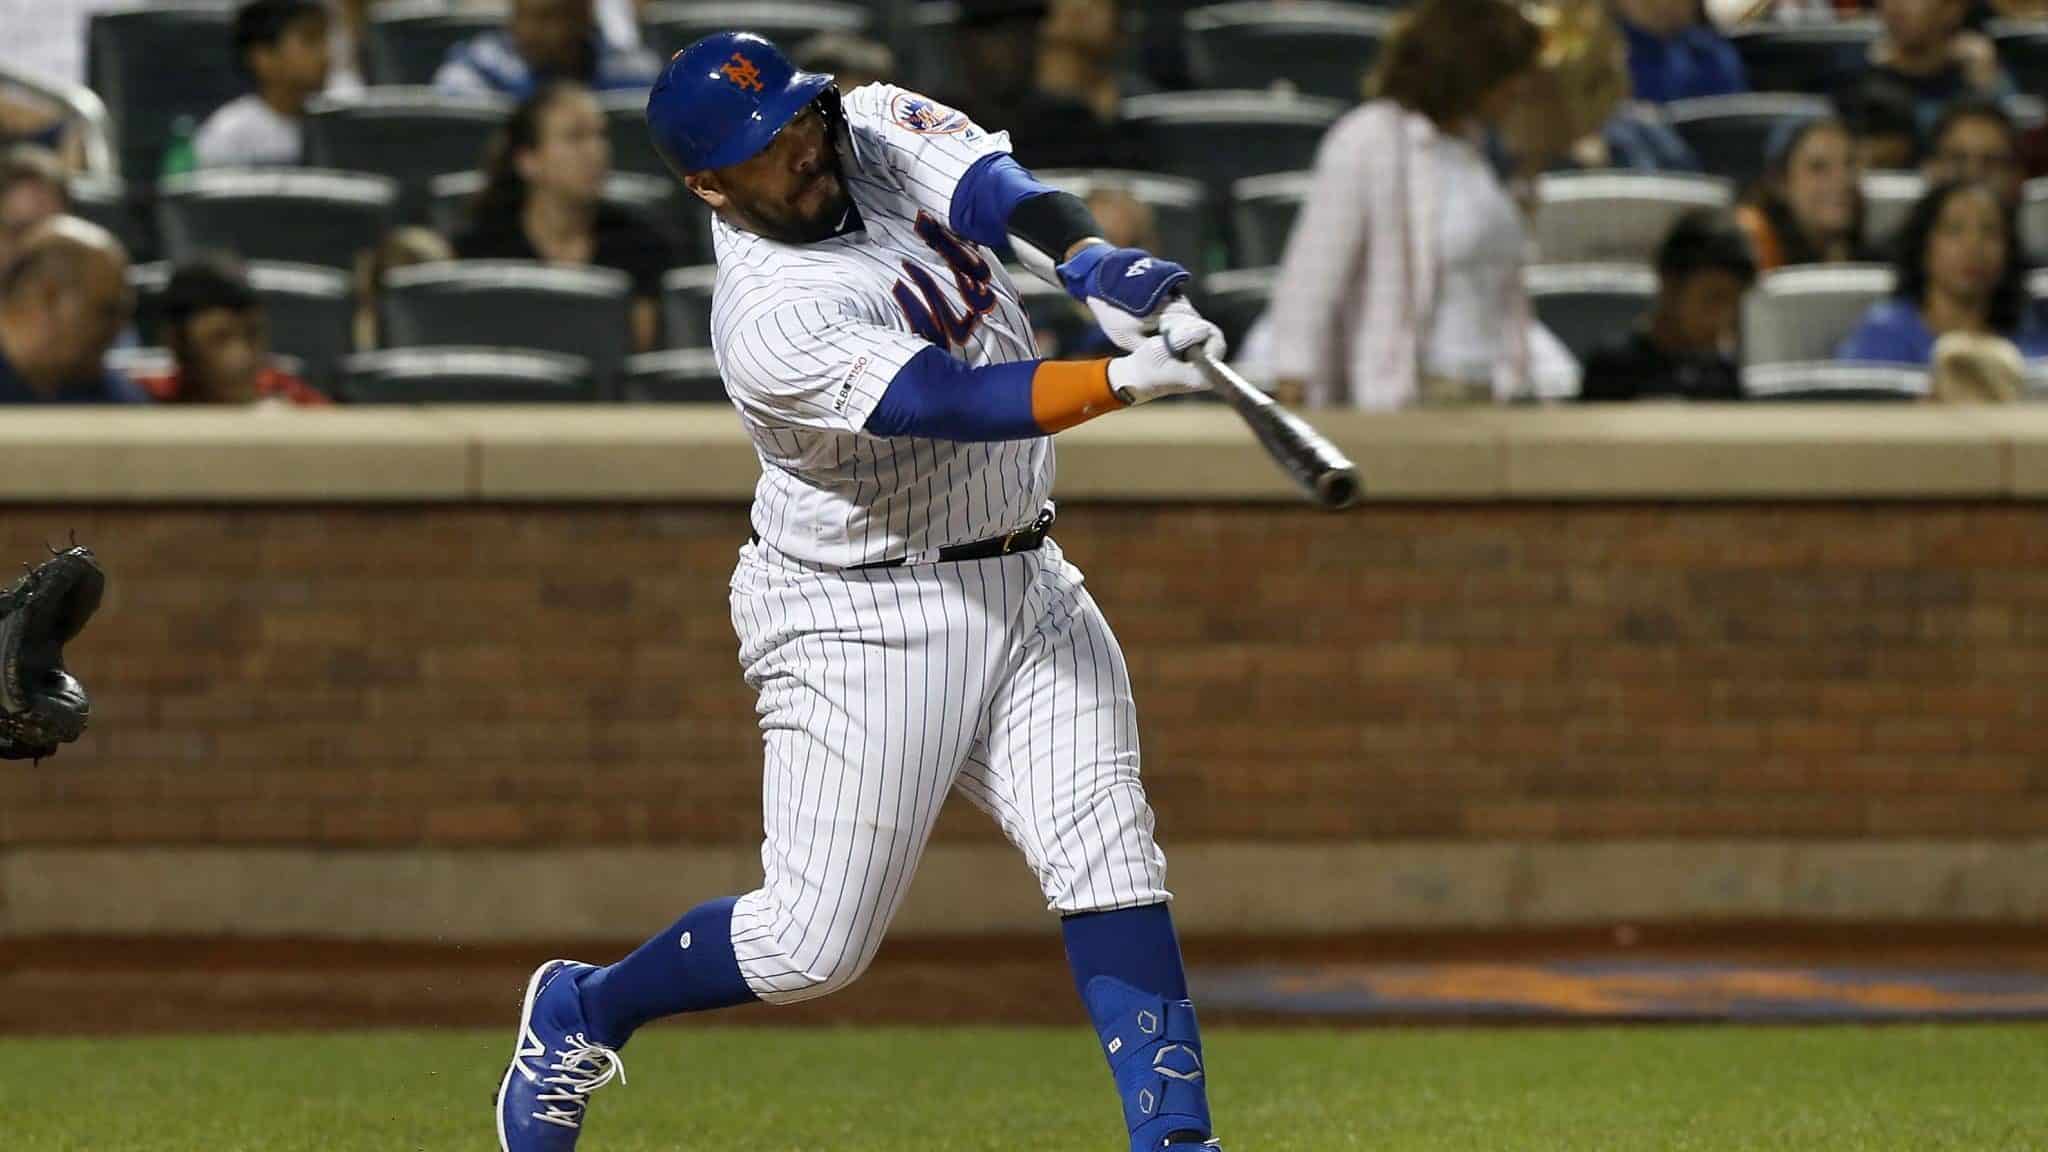 NEW YORK, NEW YORK - SEPTEMBER 28: Rene Rivera #44 of the New York Mets connects on a third inning two run home run against the Atlanta Braves at Citi Field on September 28, 2019 in New York City.